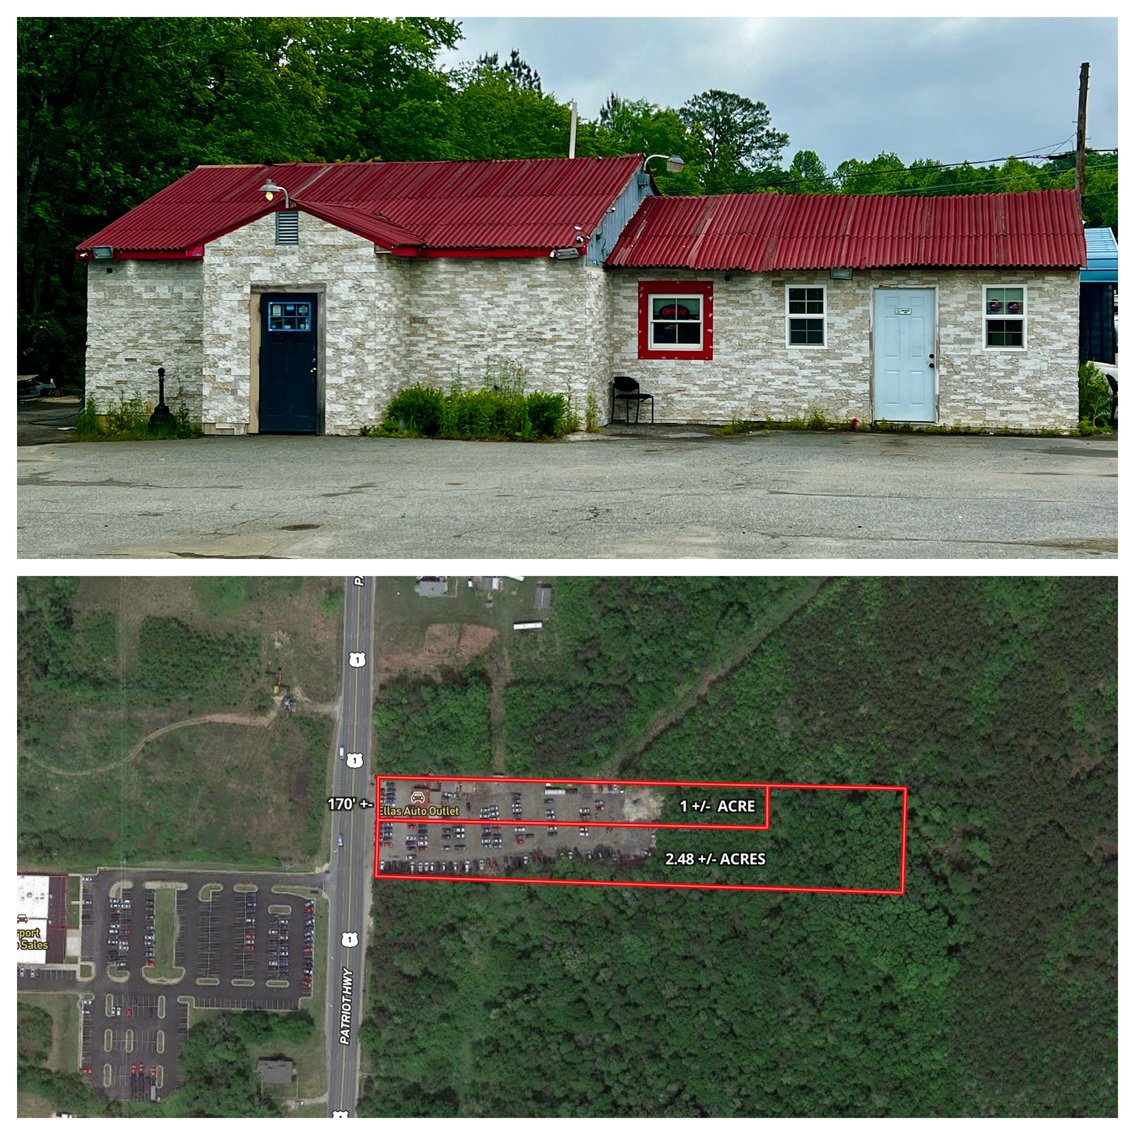 Image for 3.48 +/- Acres Zoned C3 & MZ w/Office Building Fronting Rt. 1 & Located Only Steps From the Future Kalahari Resort!!  ONLINE ONLY BIDDING!!